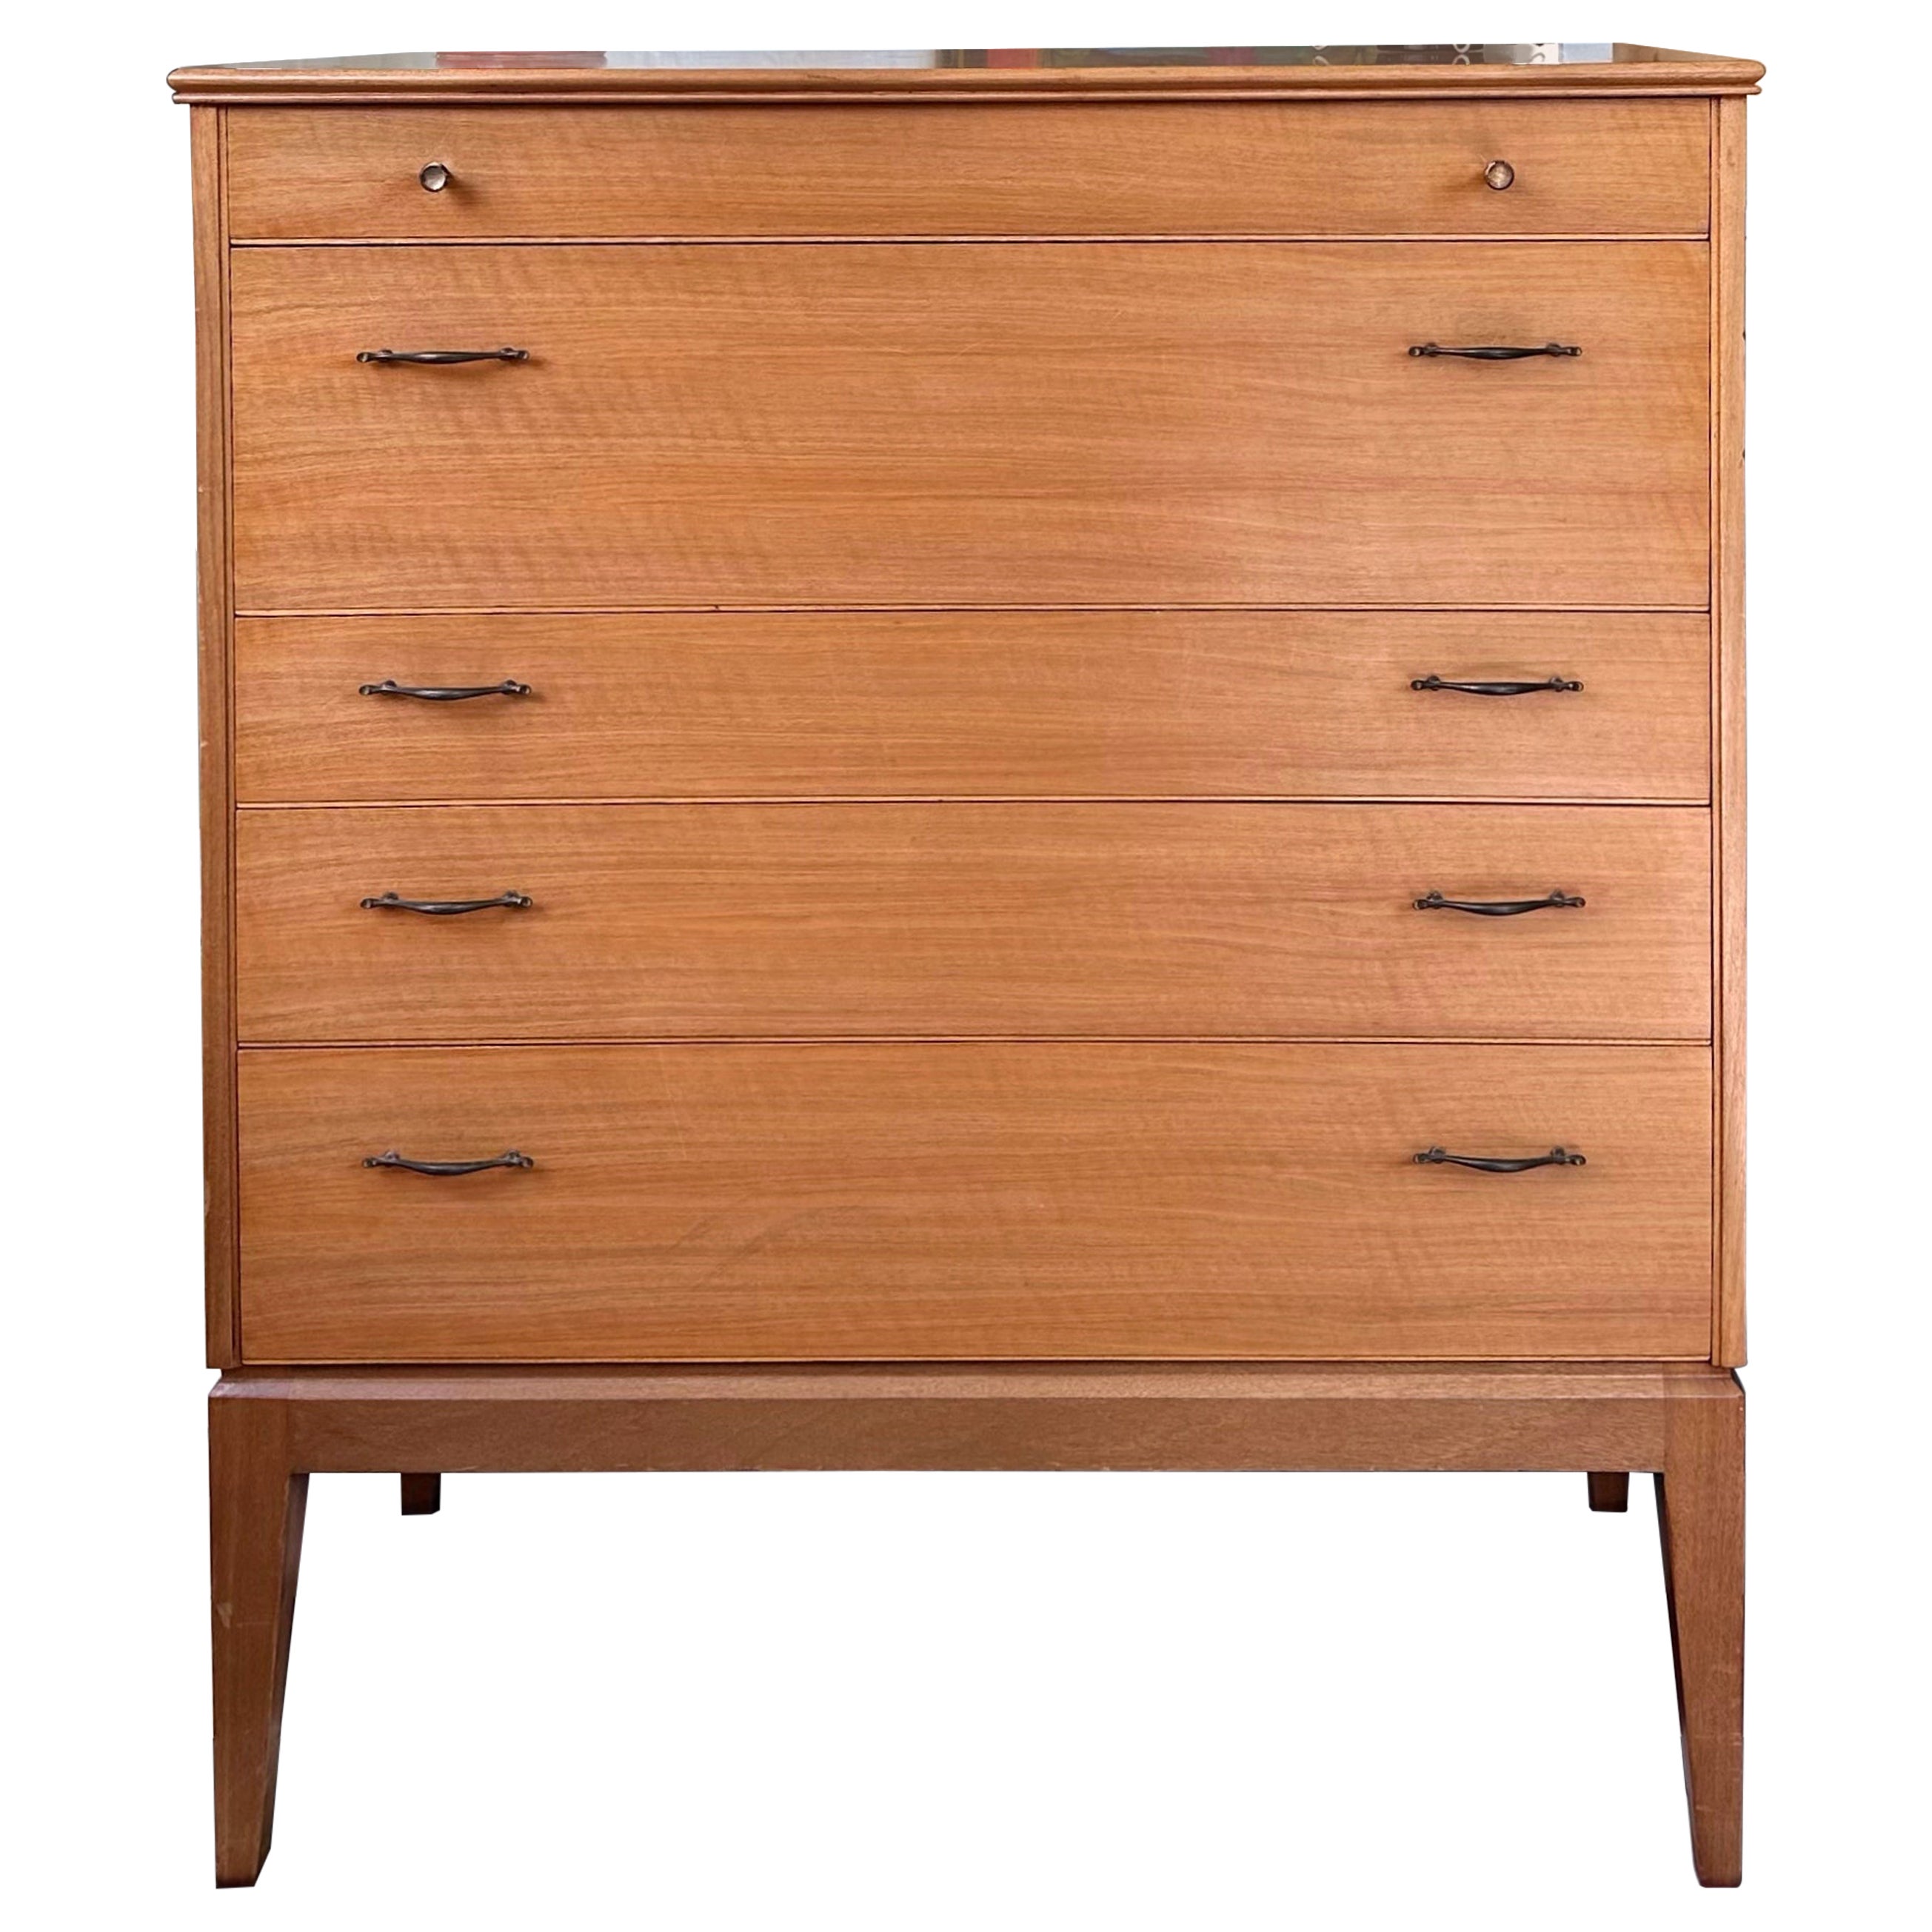 Very Rare Mid Century Retro Vintage Teak Tallboy/Chest of Drawers by Alfred Cox  For Sale